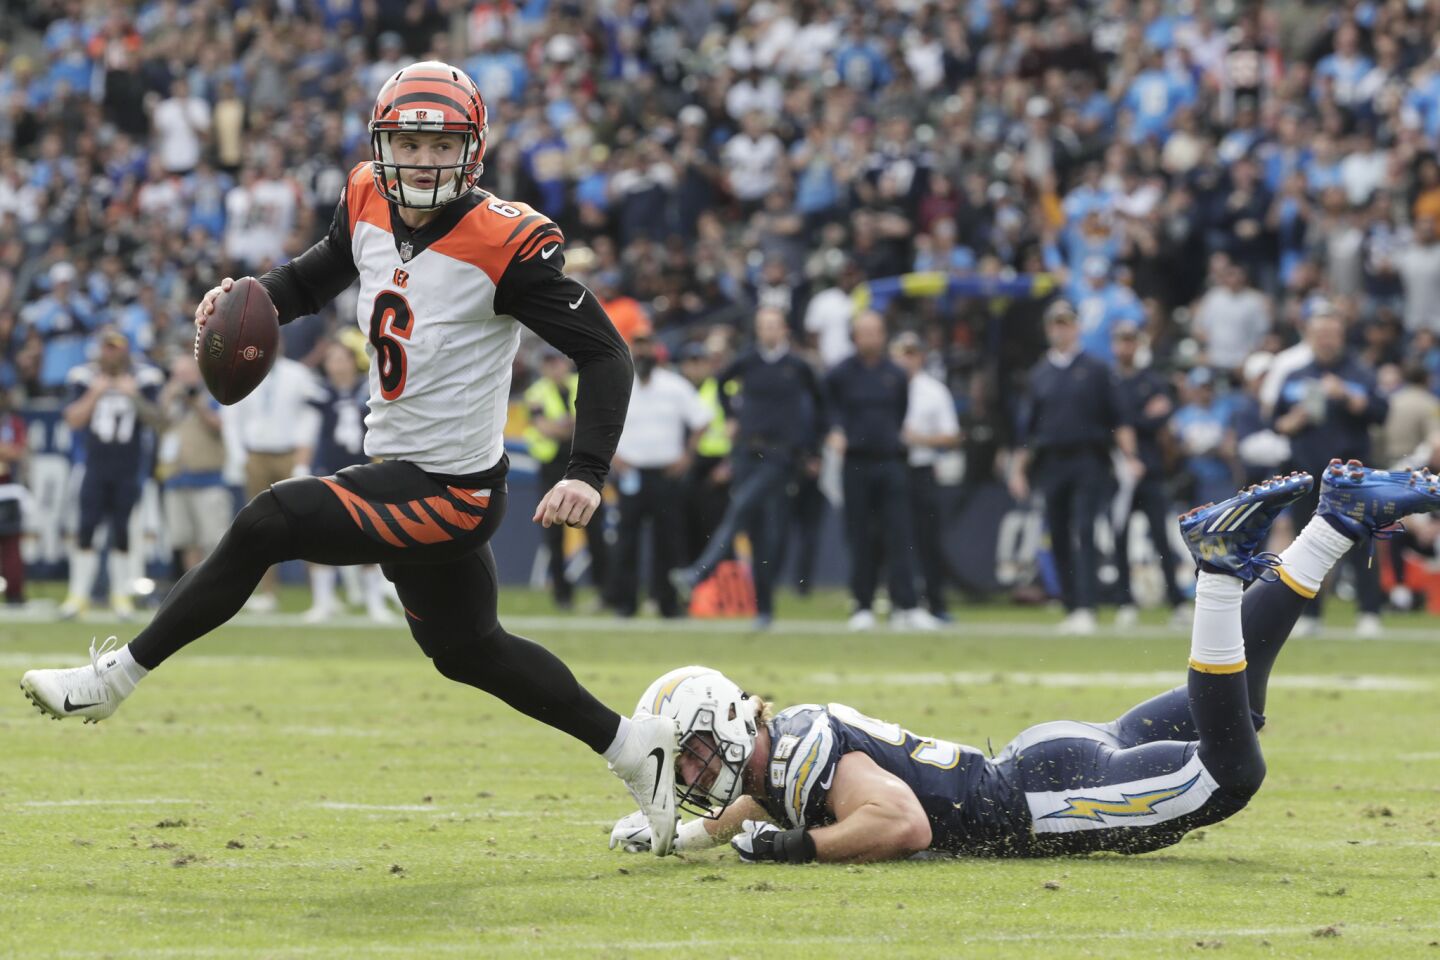 Bengals quarterback Jeff Driskel slips past Chargers defensive end Joey Bosa during a drive in second quarter.